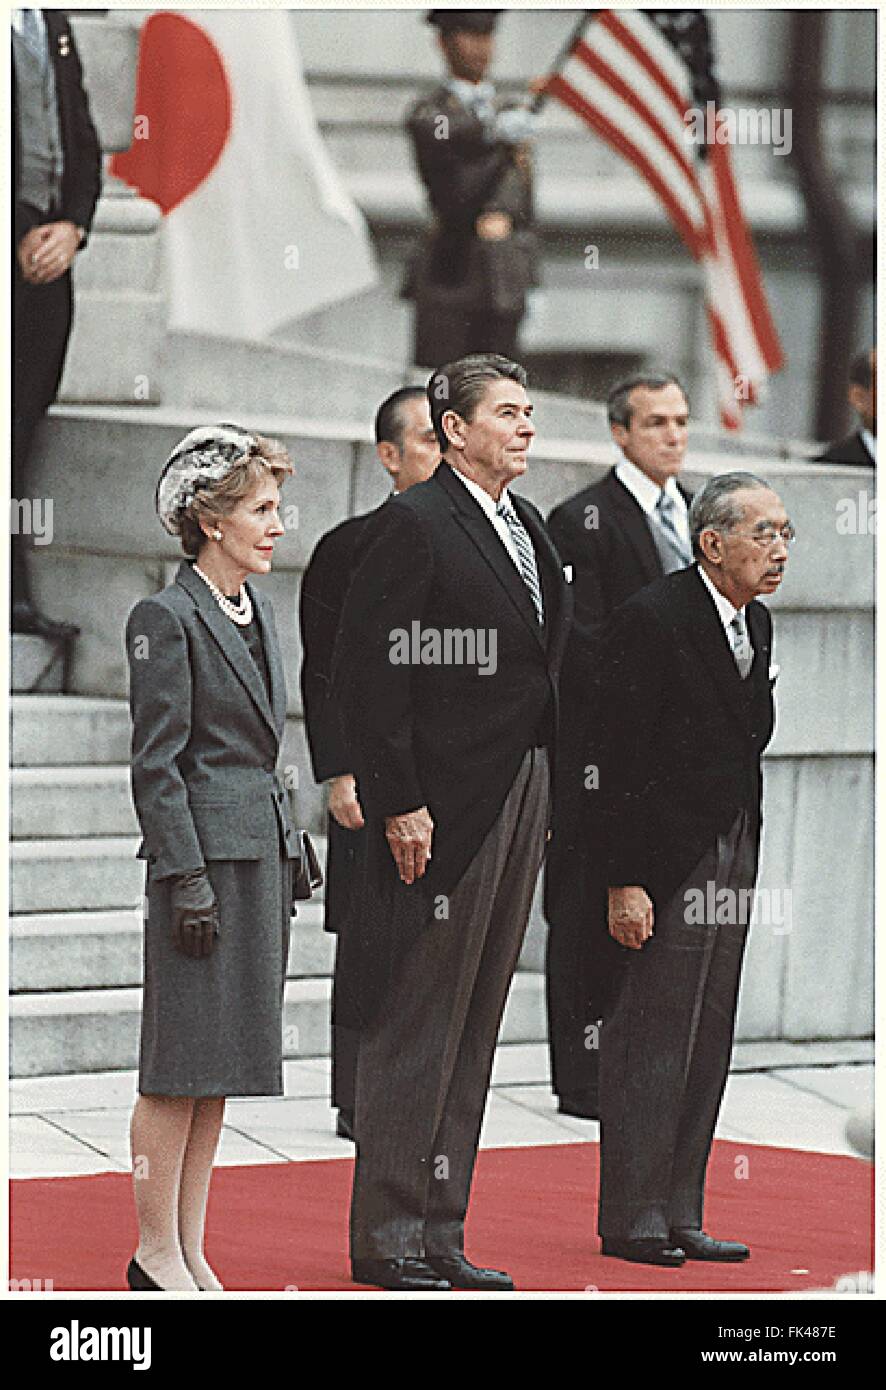 U.S. President Ronald Reagan and First Lady Nancy Reagan and Japanese Emperor Hirohito in Tokyo, Japan on November 9, 1983. Credit: White House via CNP - NO WIRE SERVICE - Stock Photo